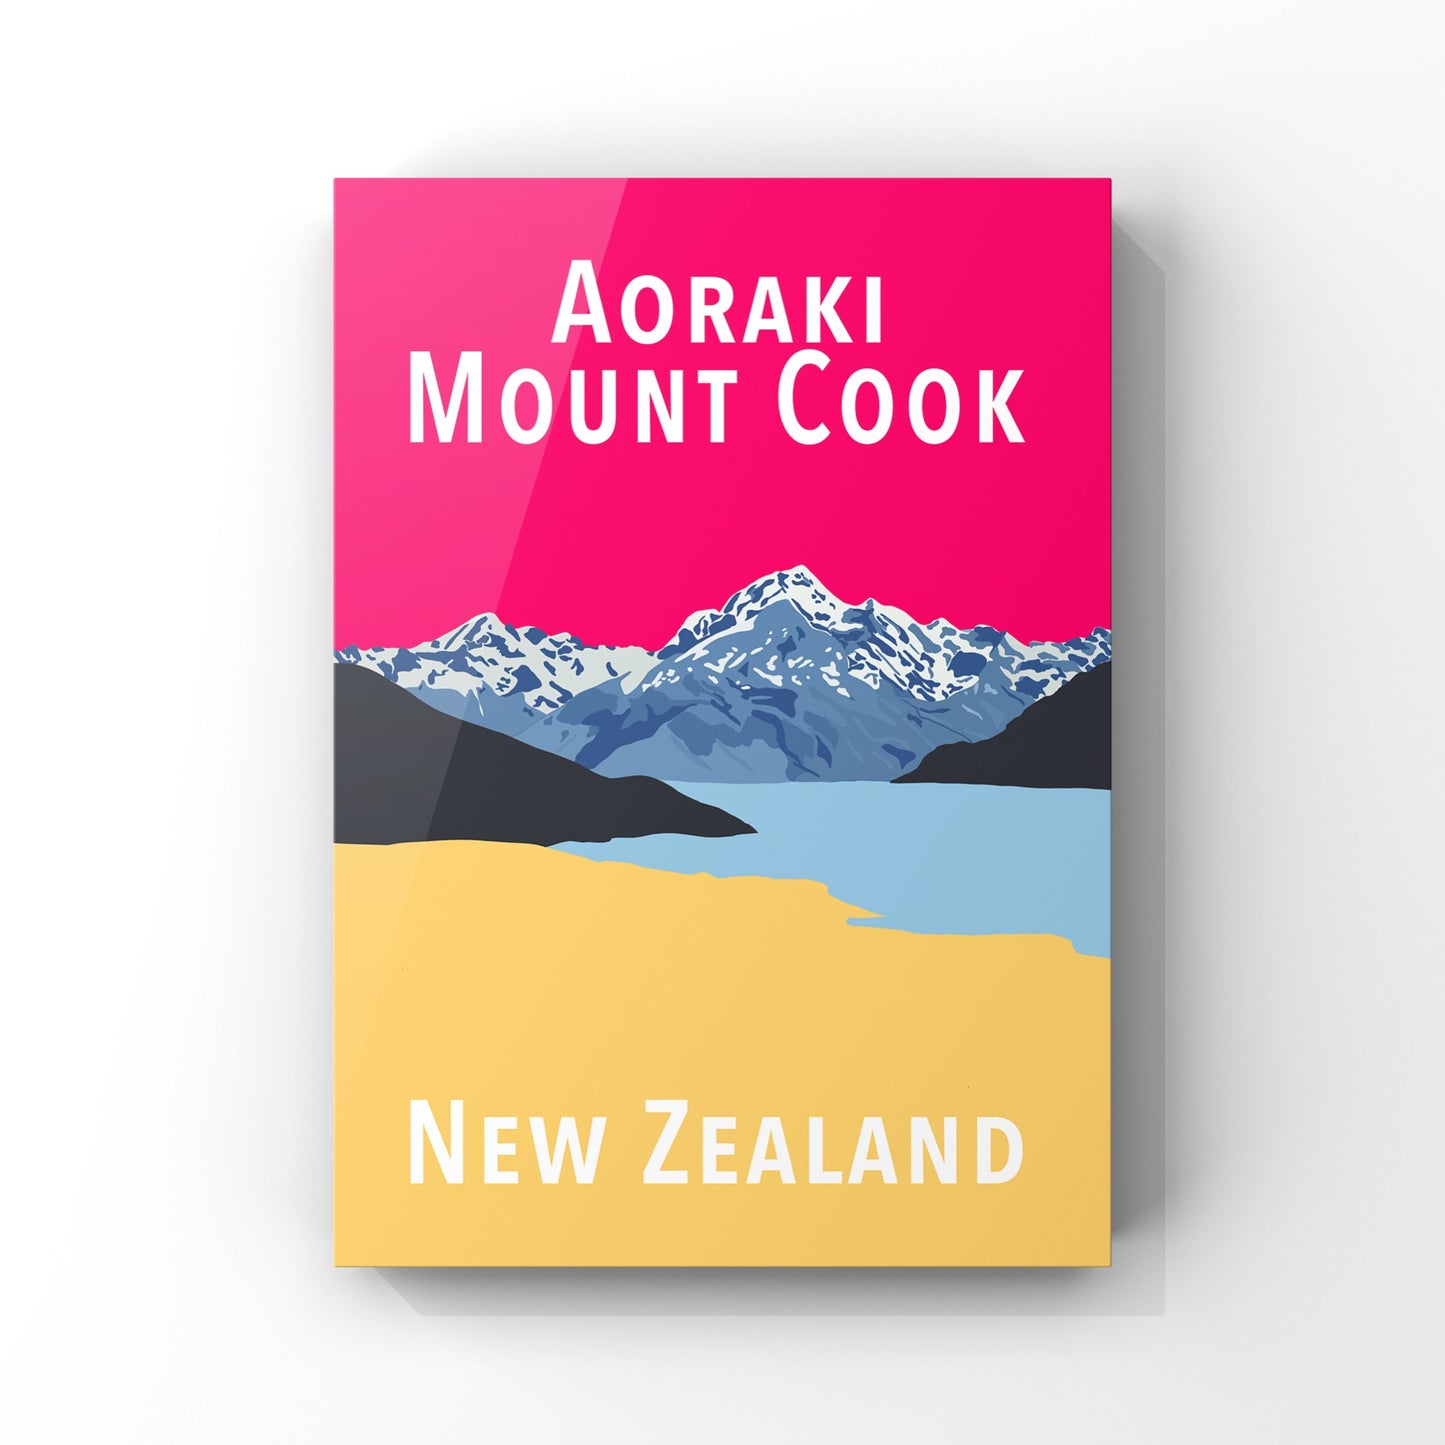 Mount Cook - in pink and yellow poster